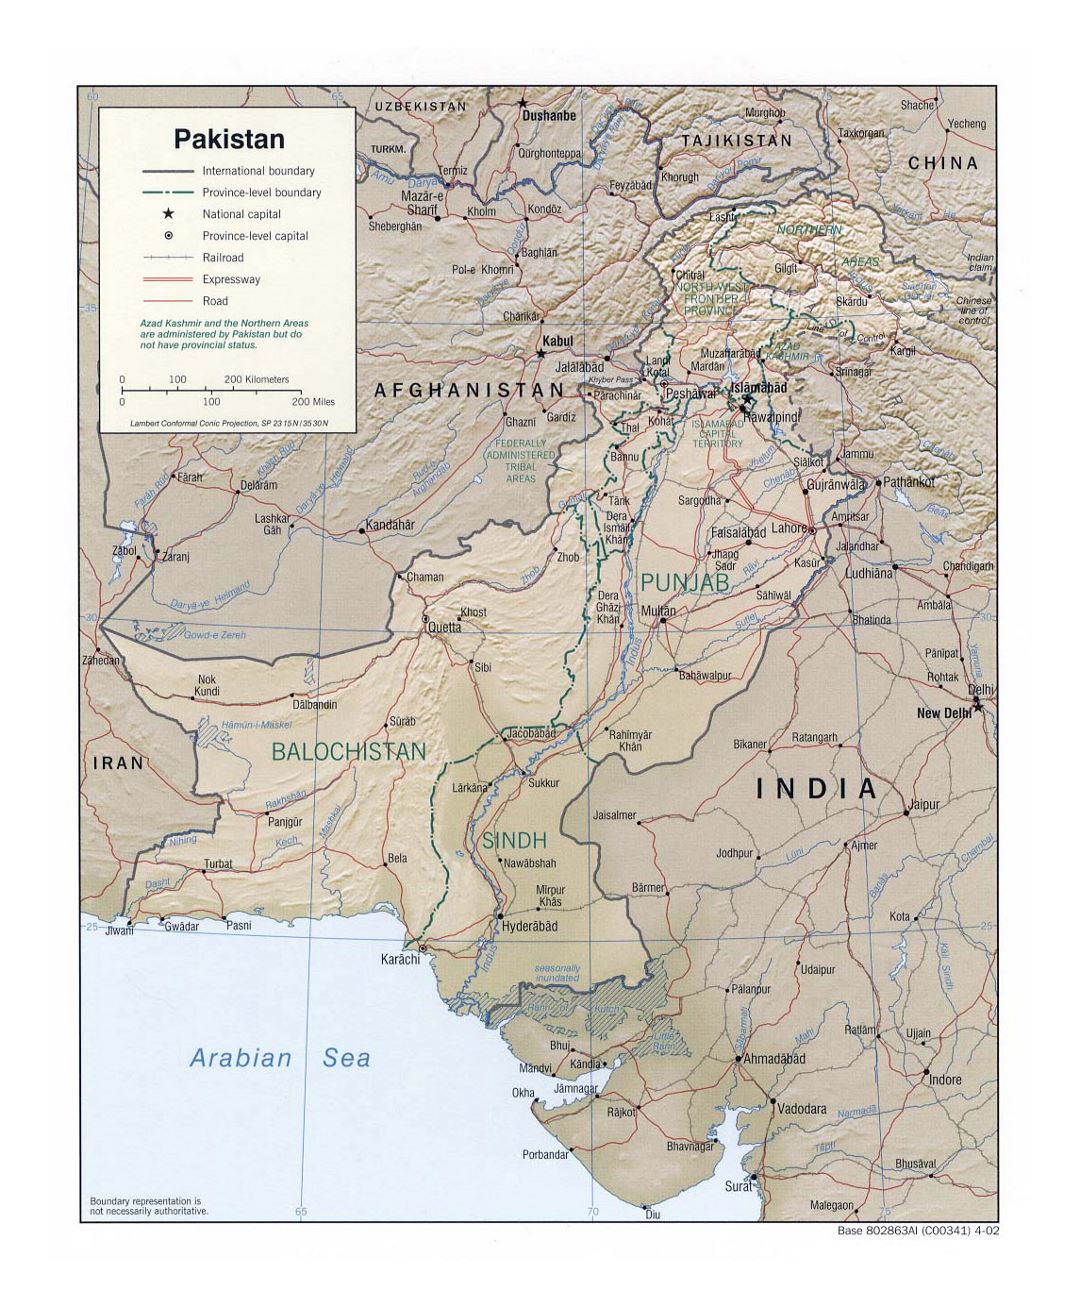 Detailed political and administrative map of Pakistan with relief, roads, railroads and major cities - 2002